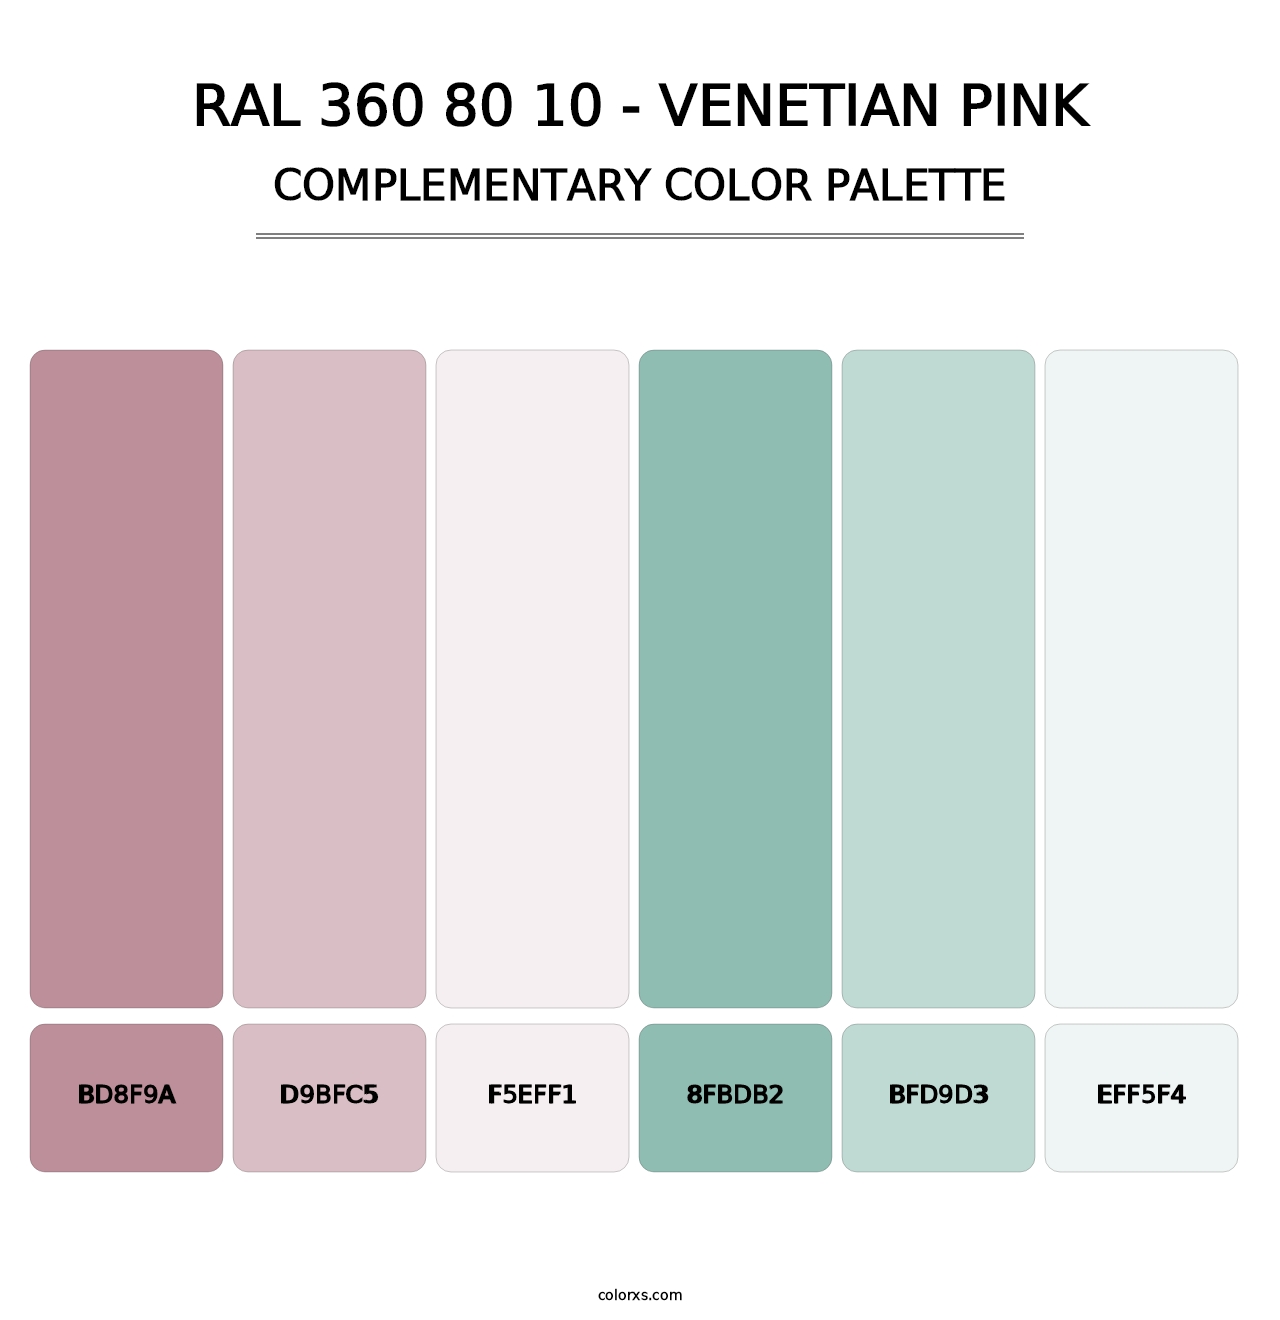 RAL 360 80 10 - Venetian Pink - Complementary Color Palette